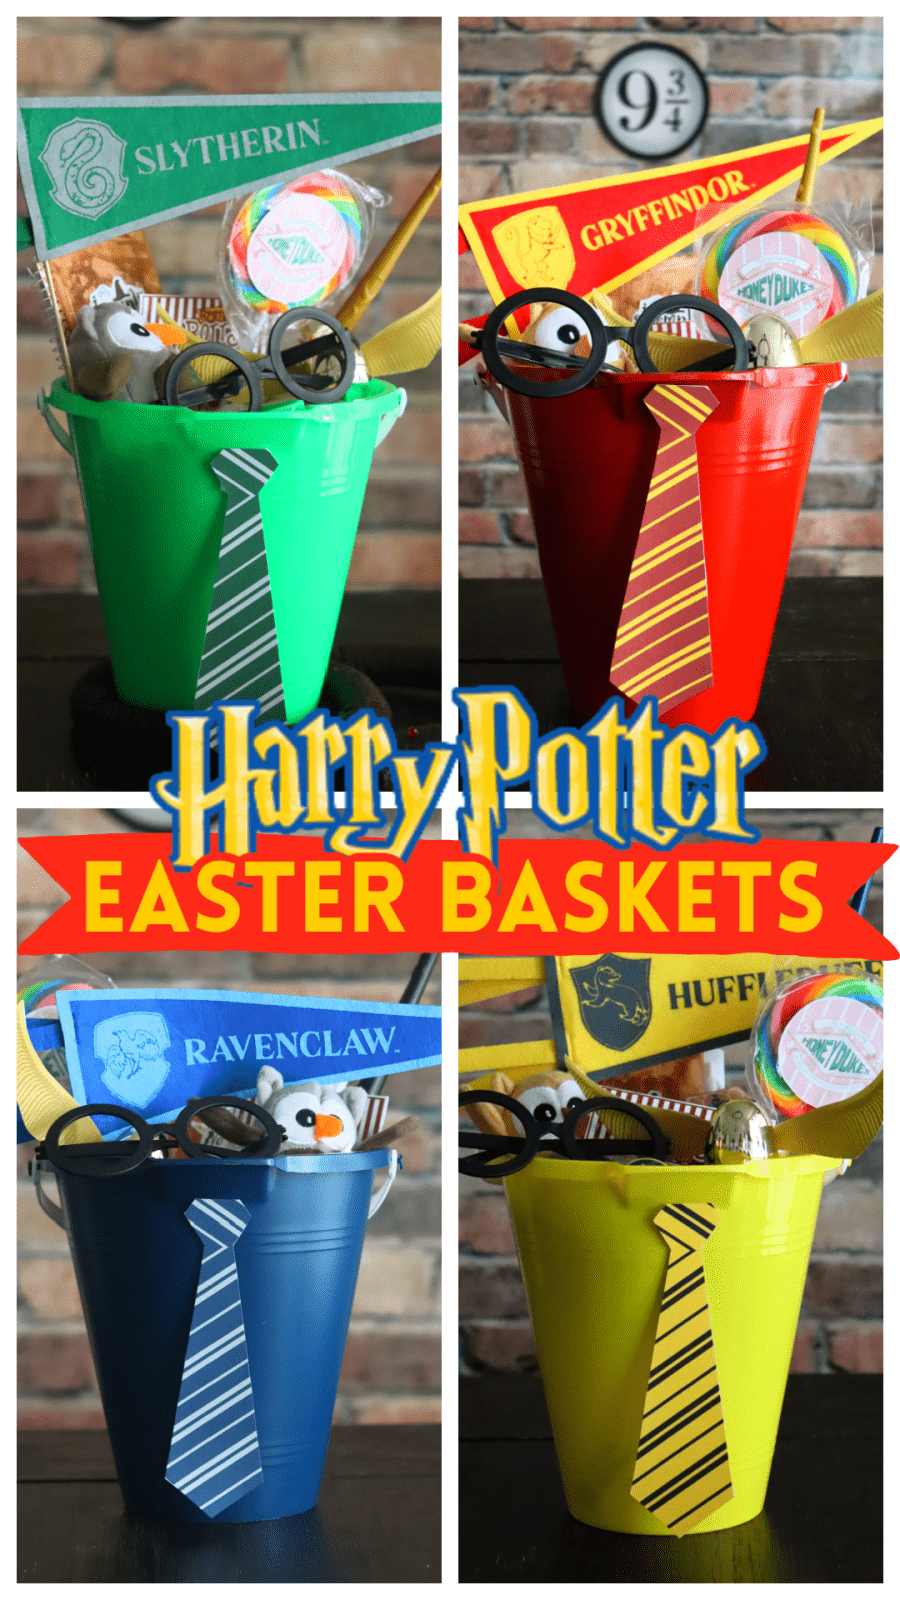 harry potter toys and candies in buckets promo graphic